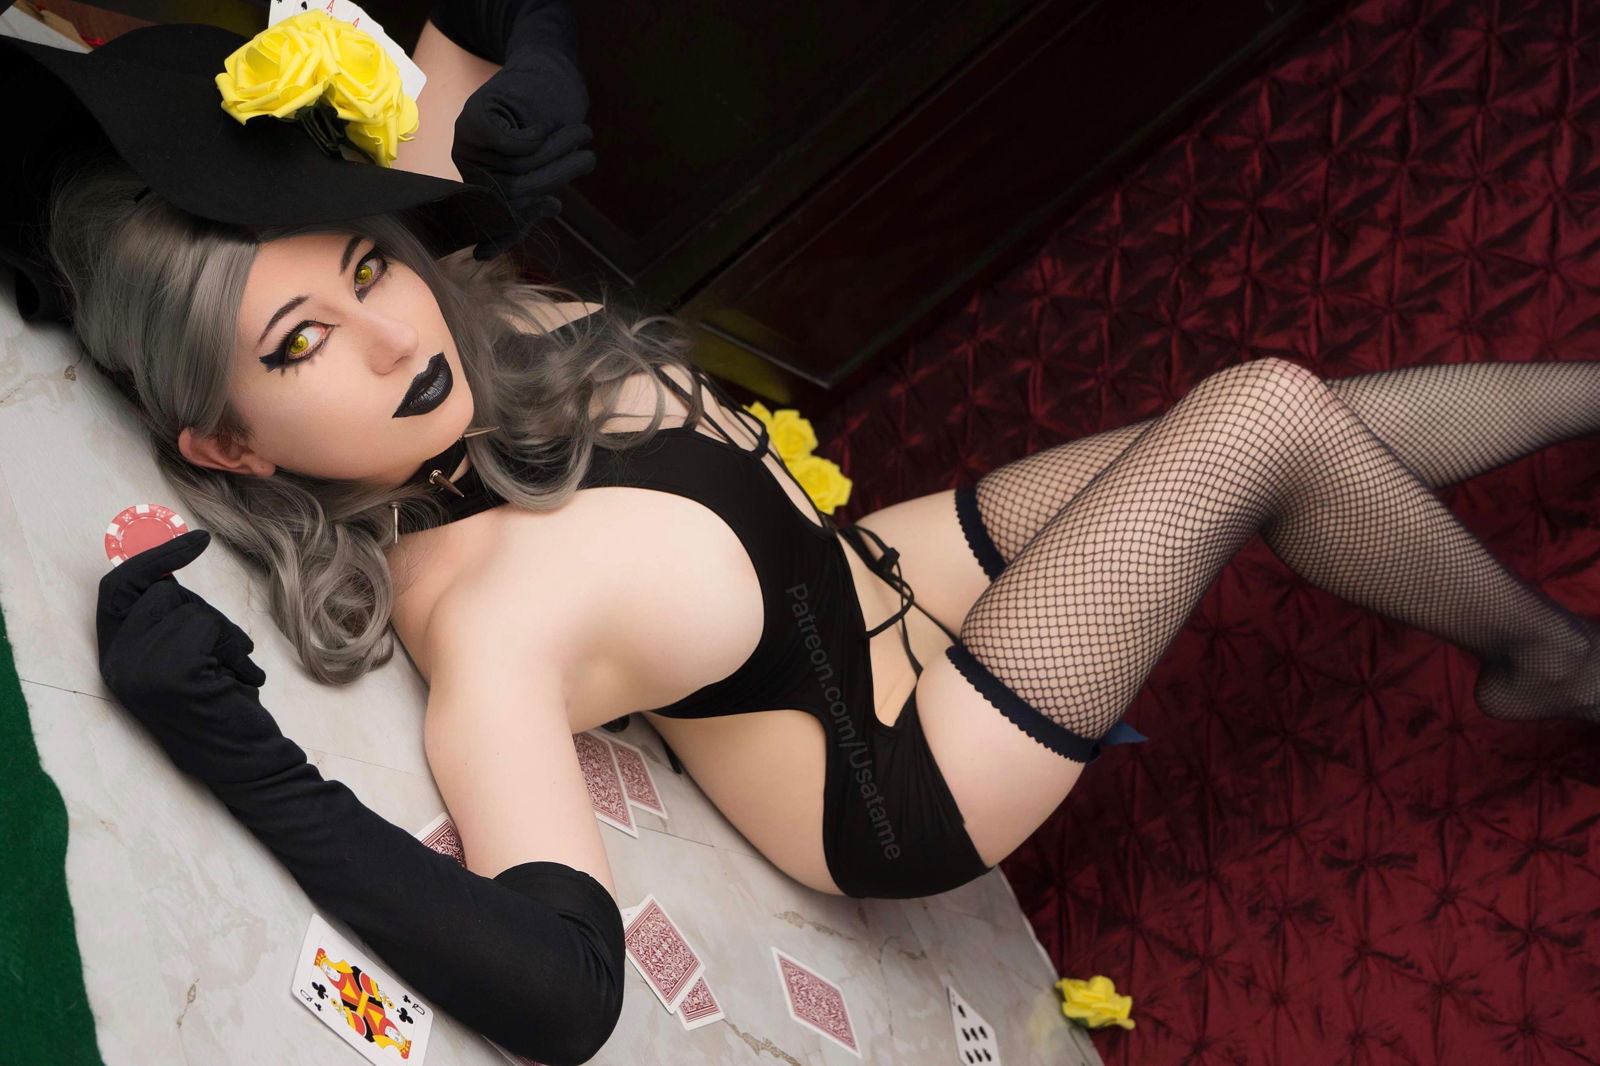 Watch the Photo by FapCosplay with the username @FapCosplay, posted on November 20, 2019. The post is about the topic Fap Cosplay. and the text says 'Shadow Sae lingerie by Usatame [OC]
#nsfwcosplay #sexycosplay #cosplaynudes #cosplaygirls #cosplay'